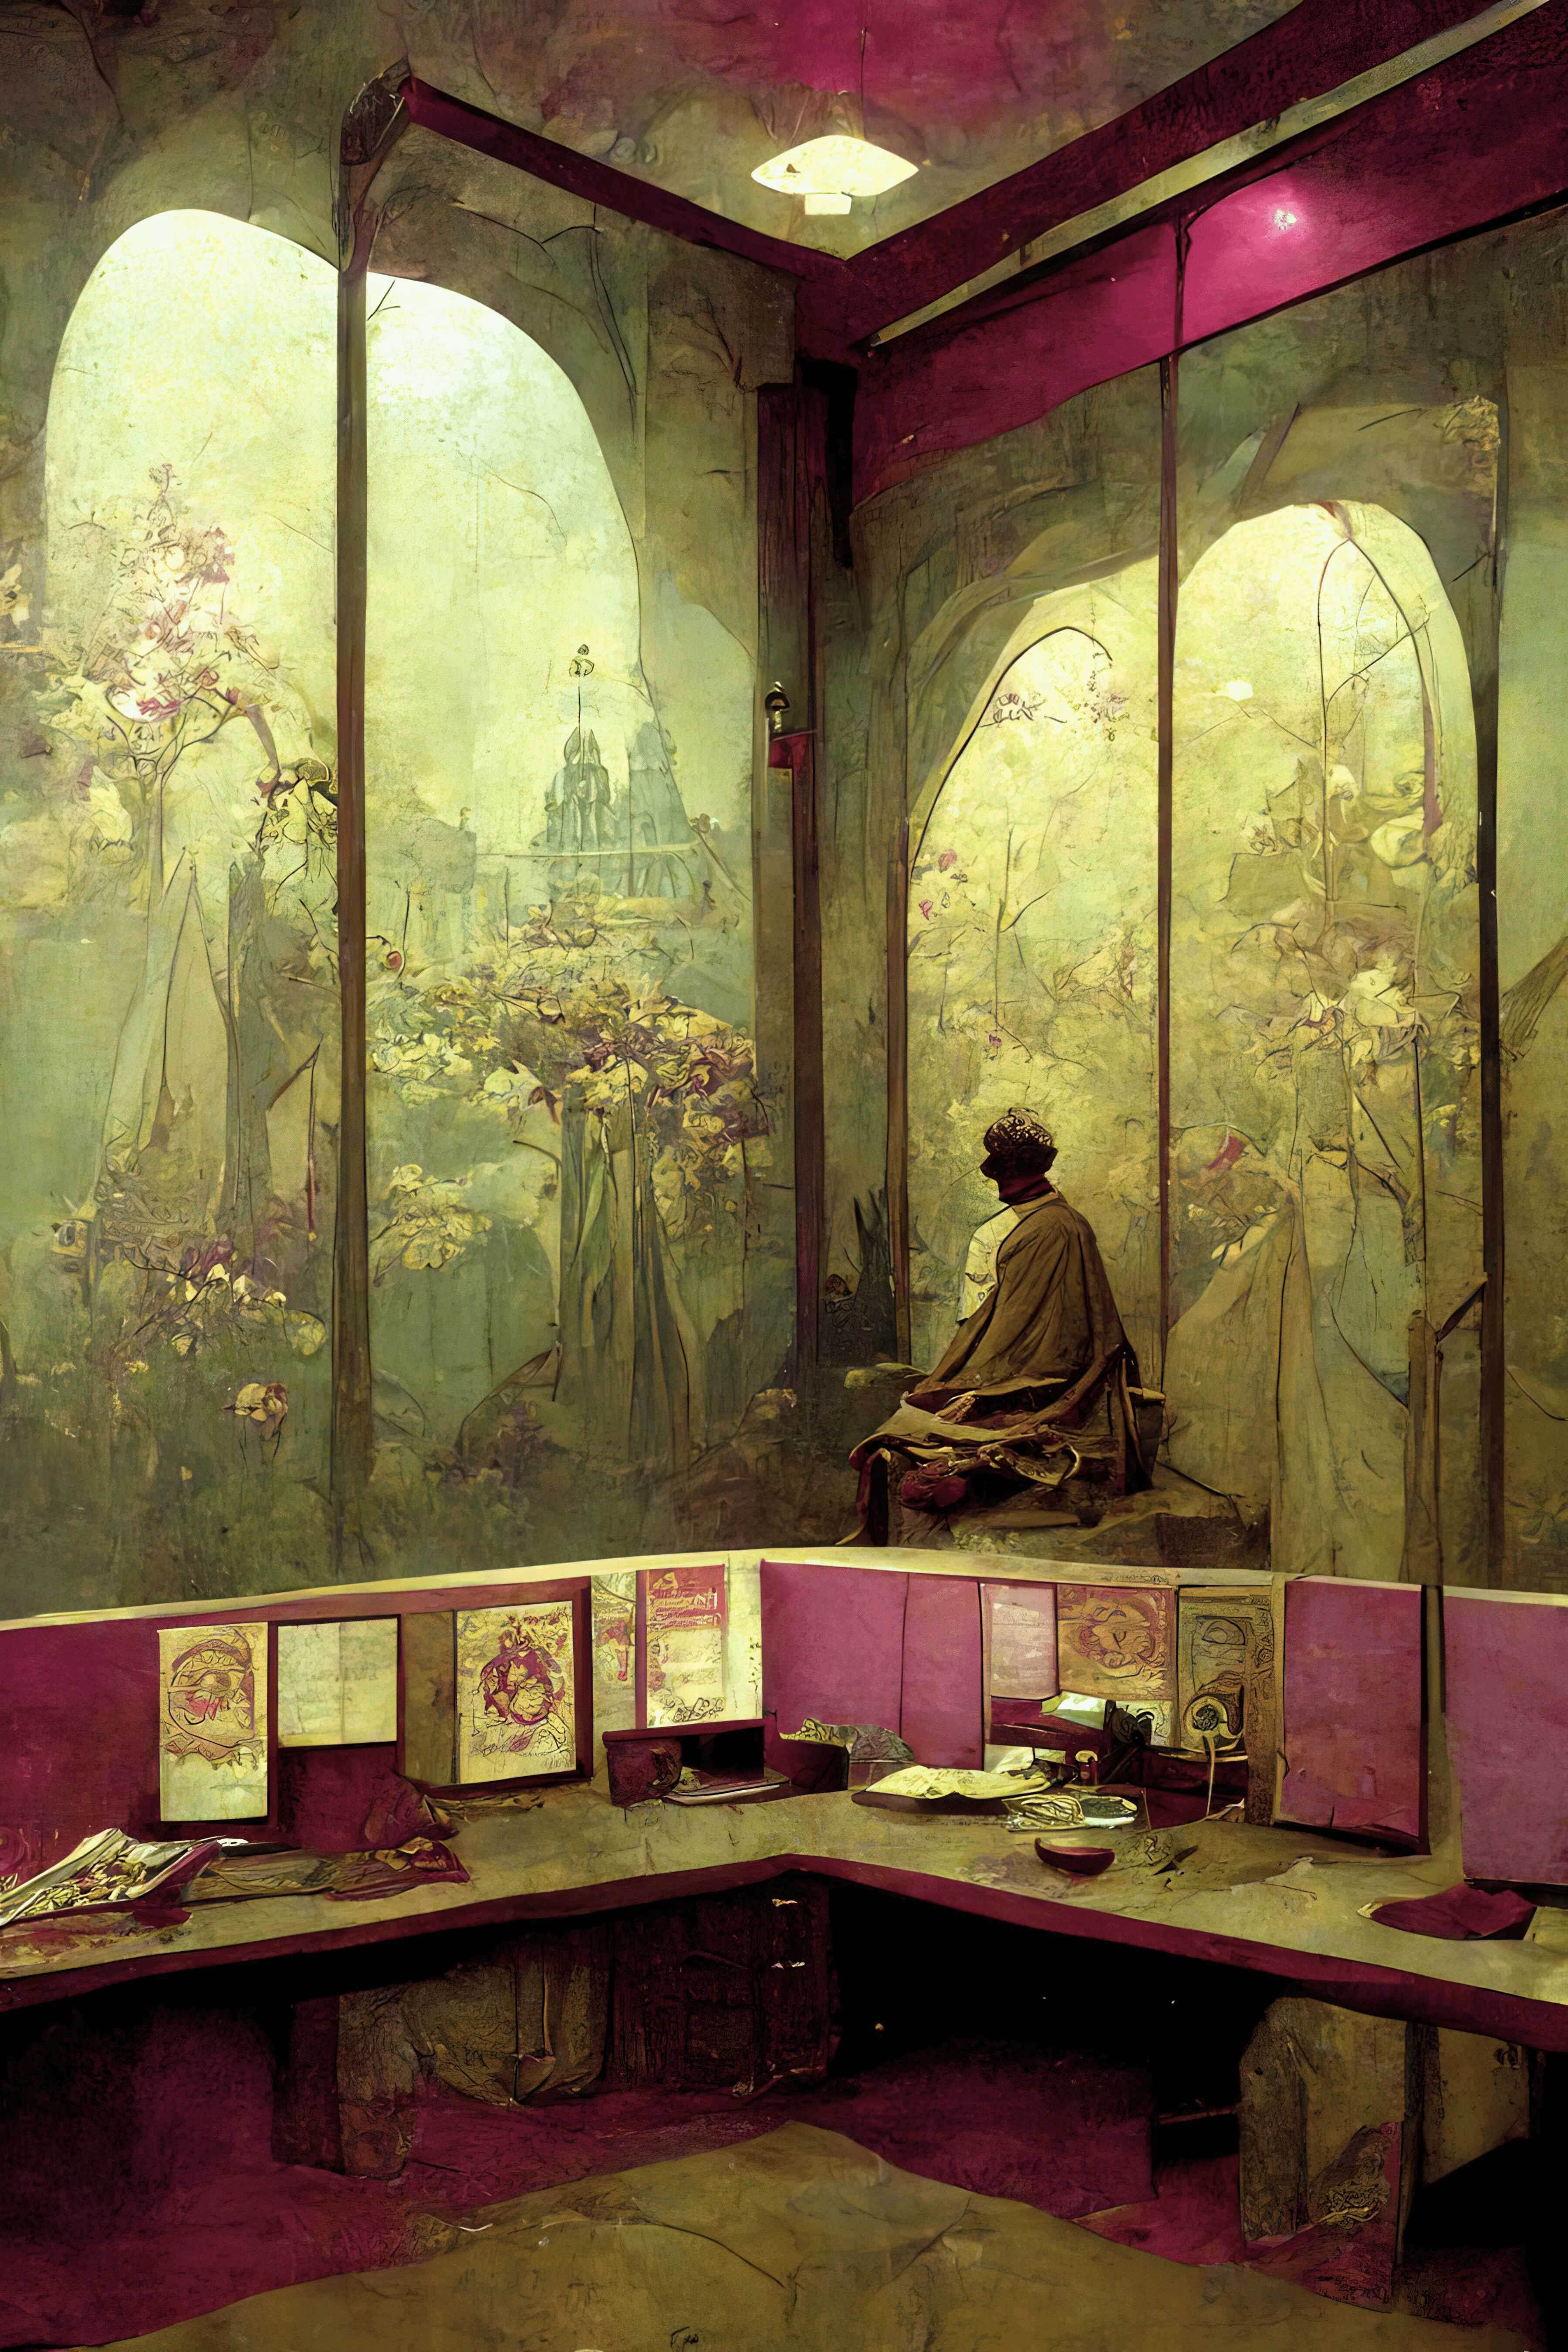 A painterly illustration of abstract office space. An empty corner cubicle sits with items and posters on the dividers. The wall is covered in wallpaper that depicts a fantastic scene. In the scene, a figure meditates in a forest with castles in the background. The wallpaper feels like a fantasy world. A fluorescent office light shines from the ceiling. 